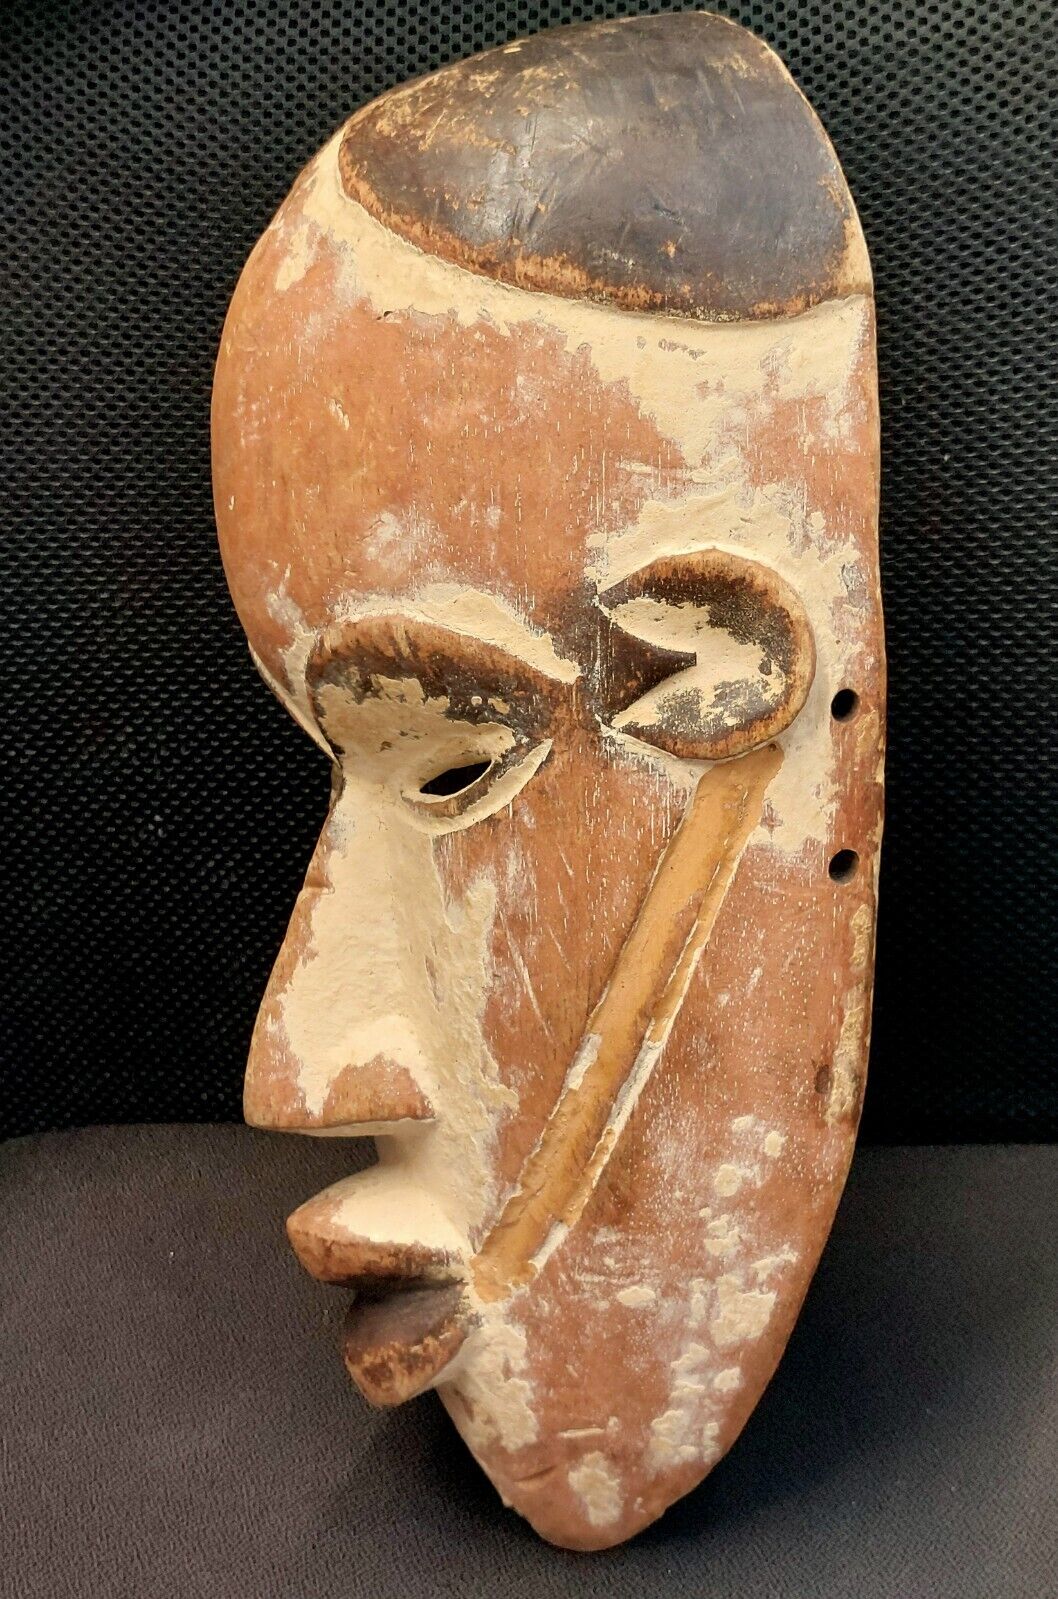 Old Vintage African Hand Carved Wooden Tribal Mask - 14.5” x 8” x 4